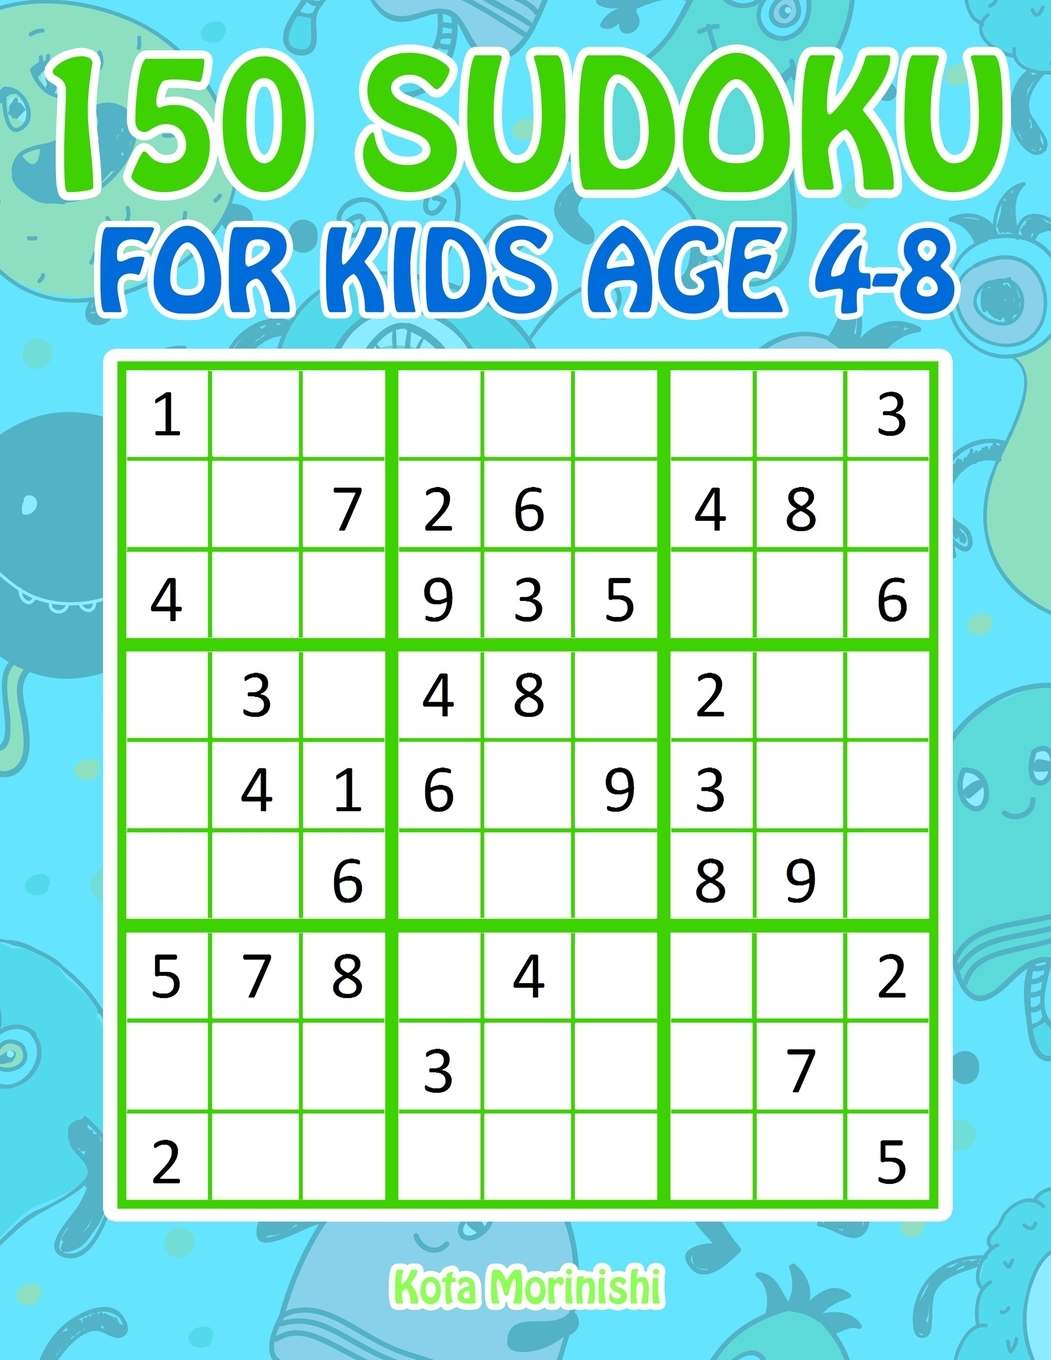 Sudoku Puzzle Books For Kids 150 Sudoku For Kids Ages 4 8 Sudoku With 